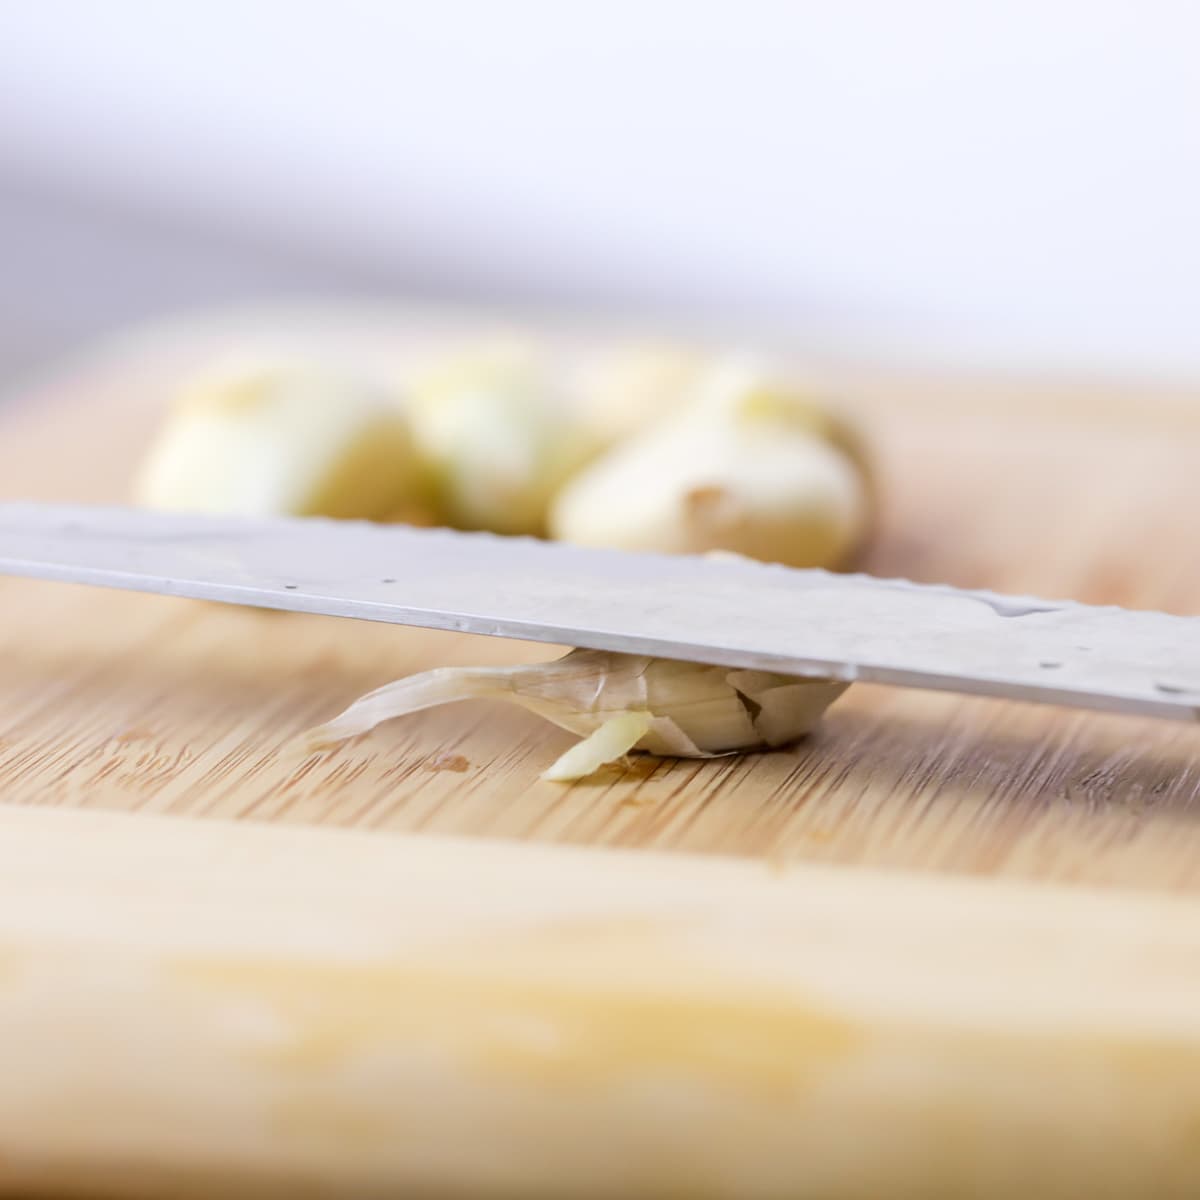 How to mince garlic with a knife.